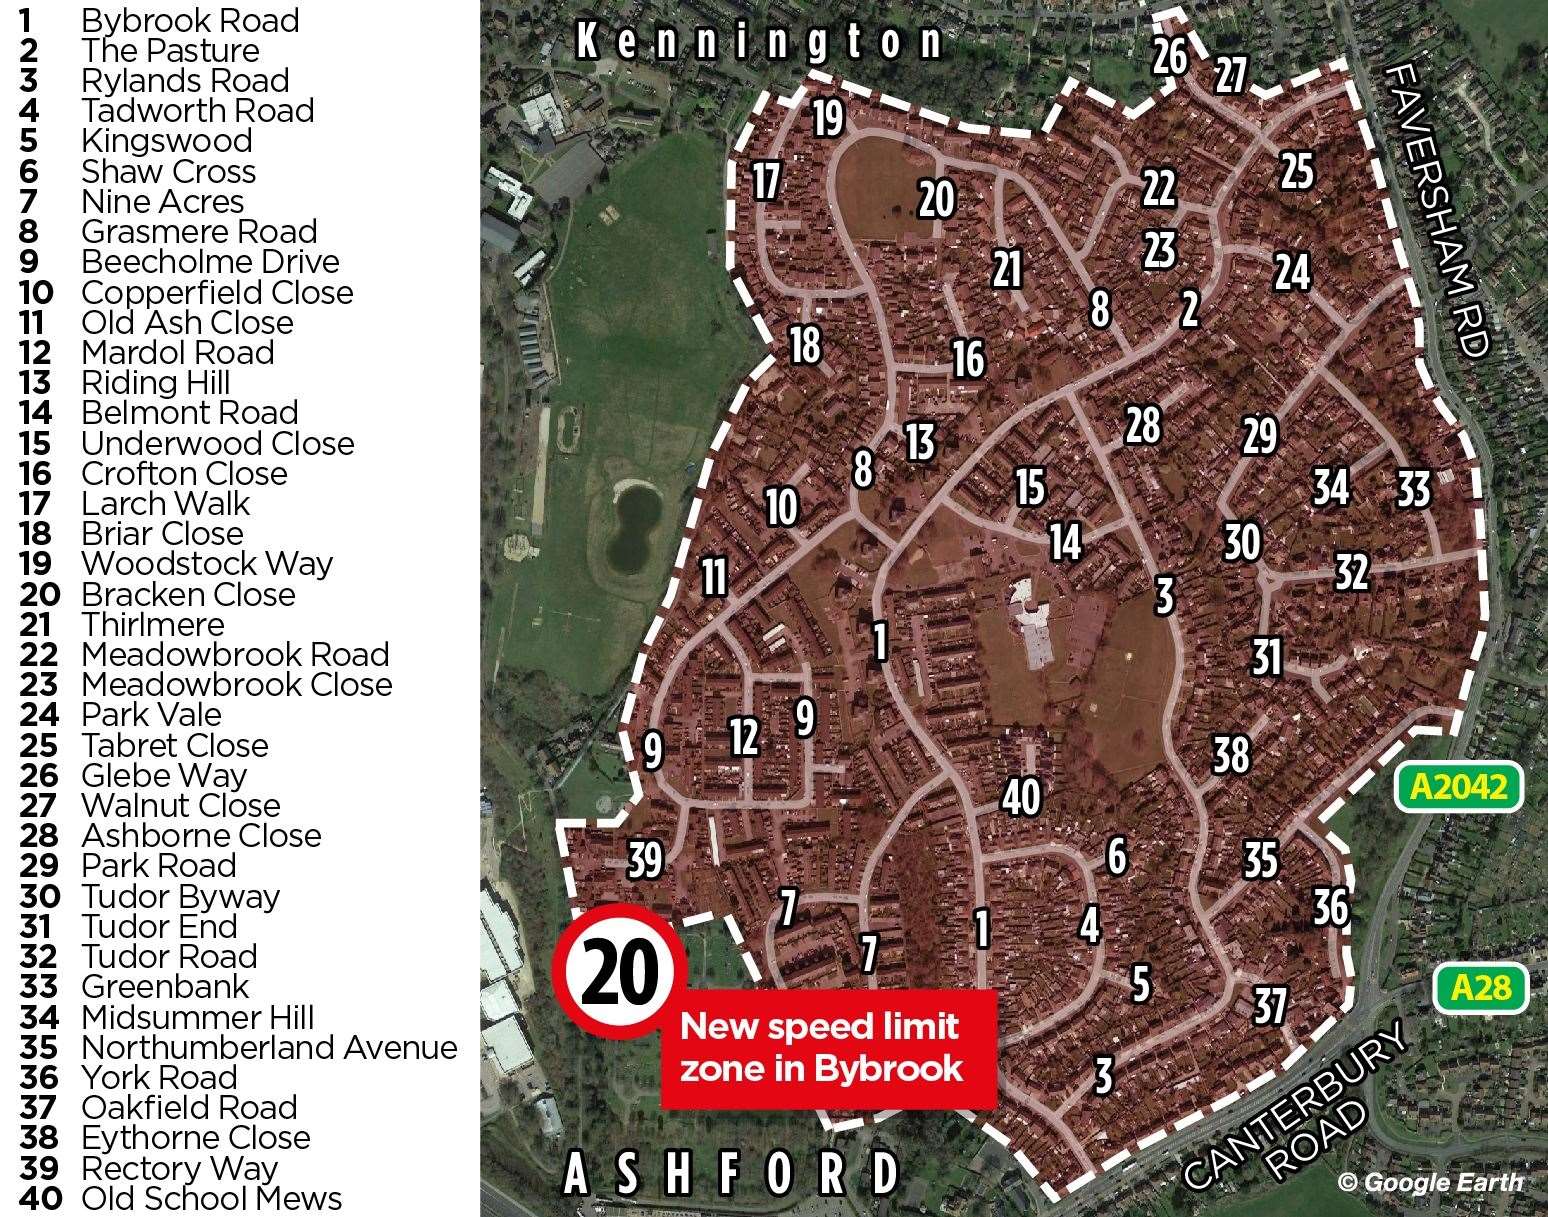 Forty roads in Kennington now have a 20mph limit